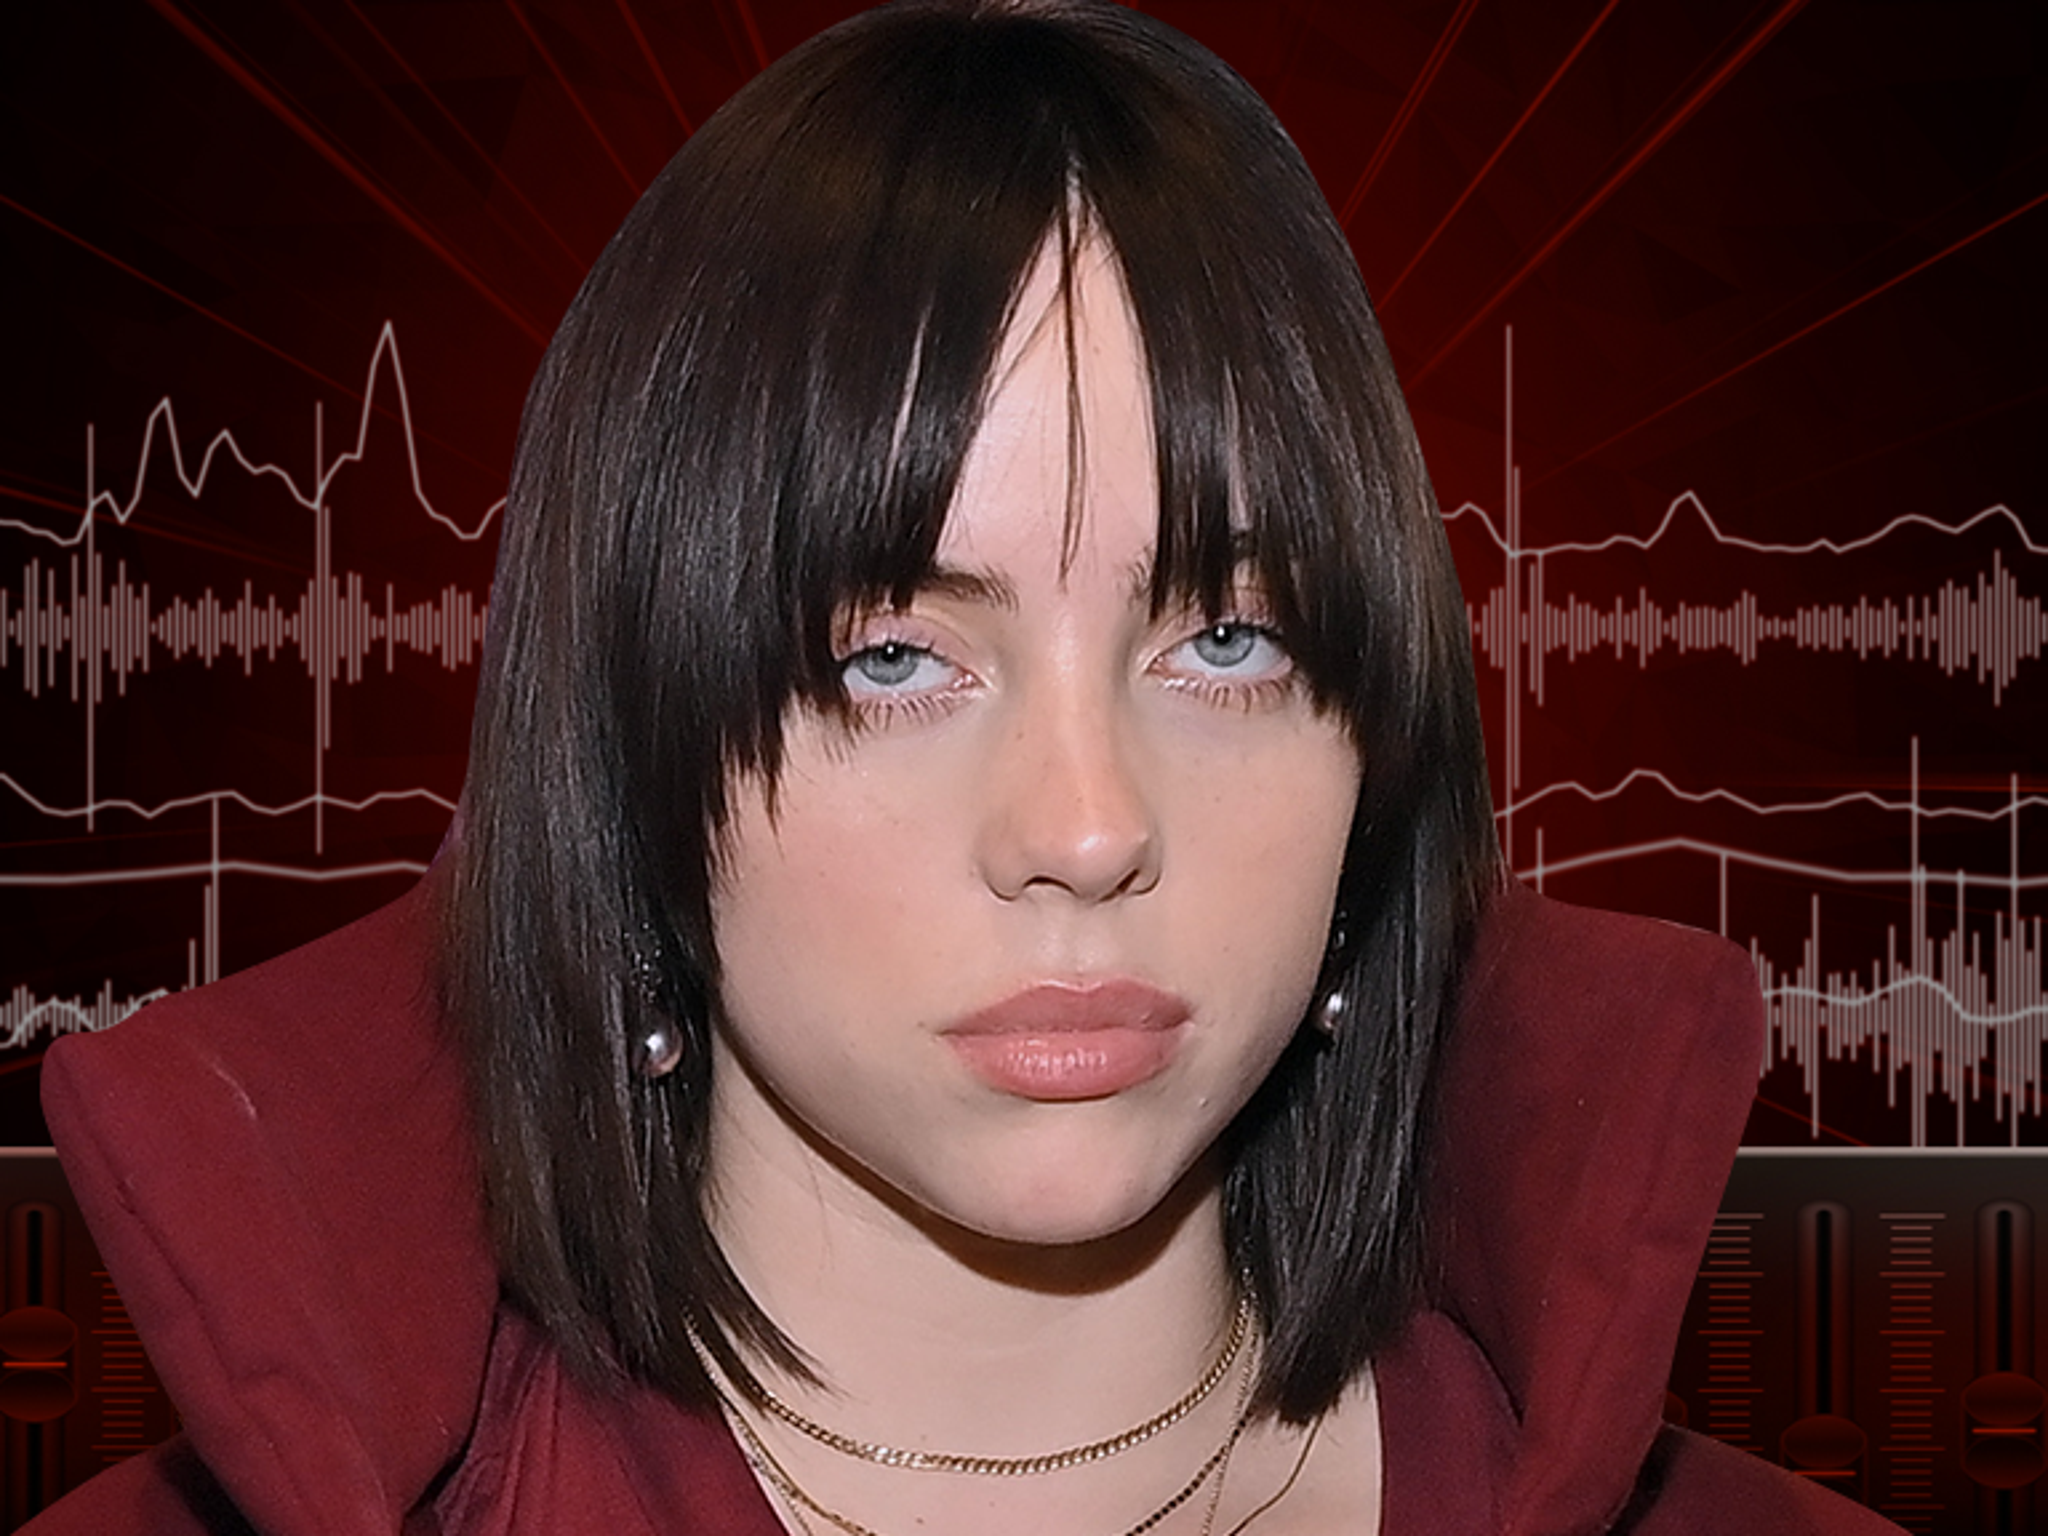 Sex Xxx Video Dawlod - Billie Eilish Says She Started Watching Porn at 11, Calls it 'Disgrace'